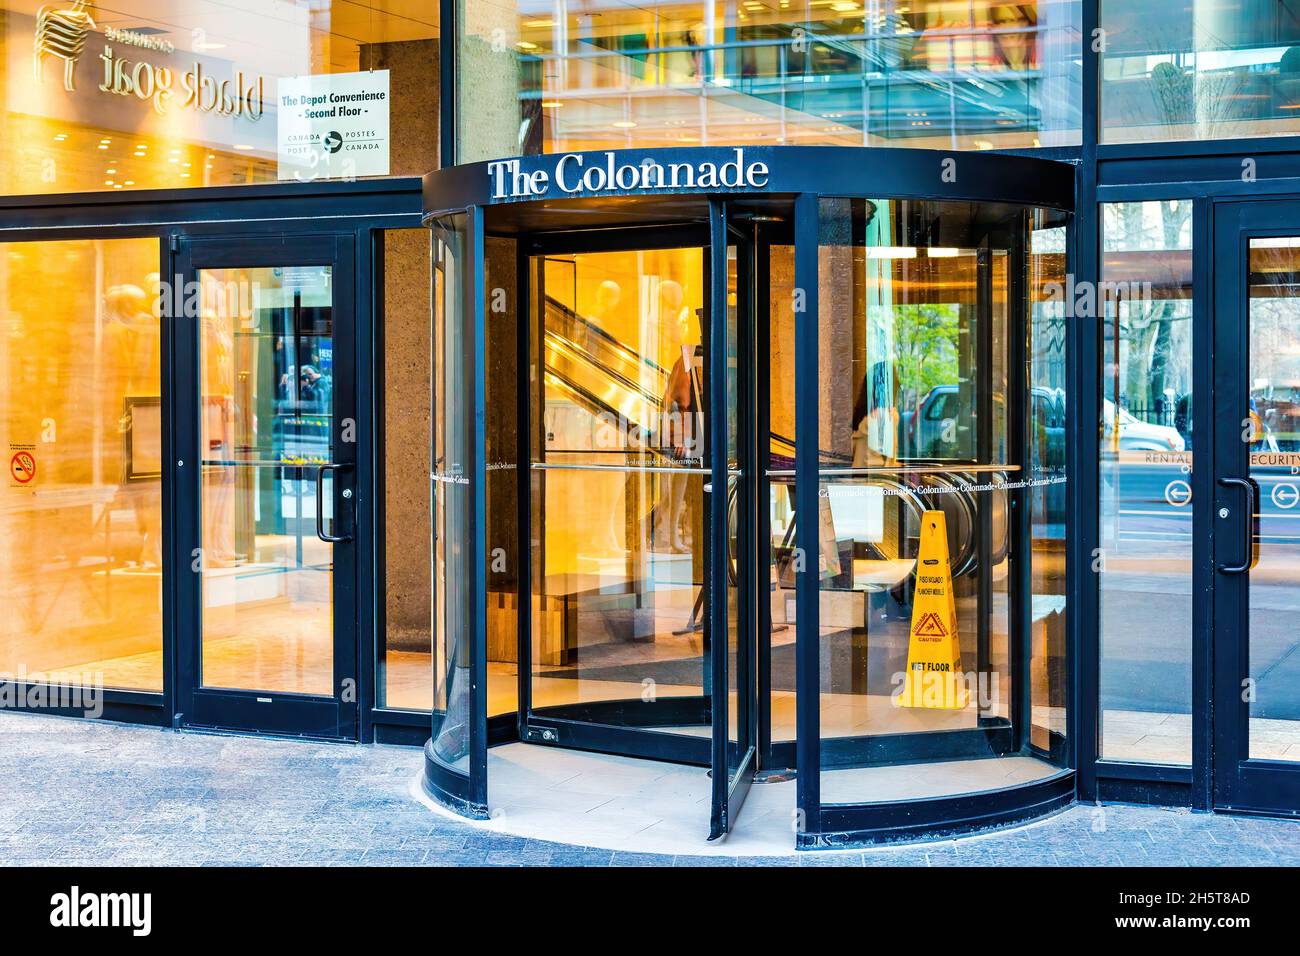 Revolving entrance door to The Colonnade business in the downtown district of Toronto, Canada. Nov. 10, 2021 Stock Photo